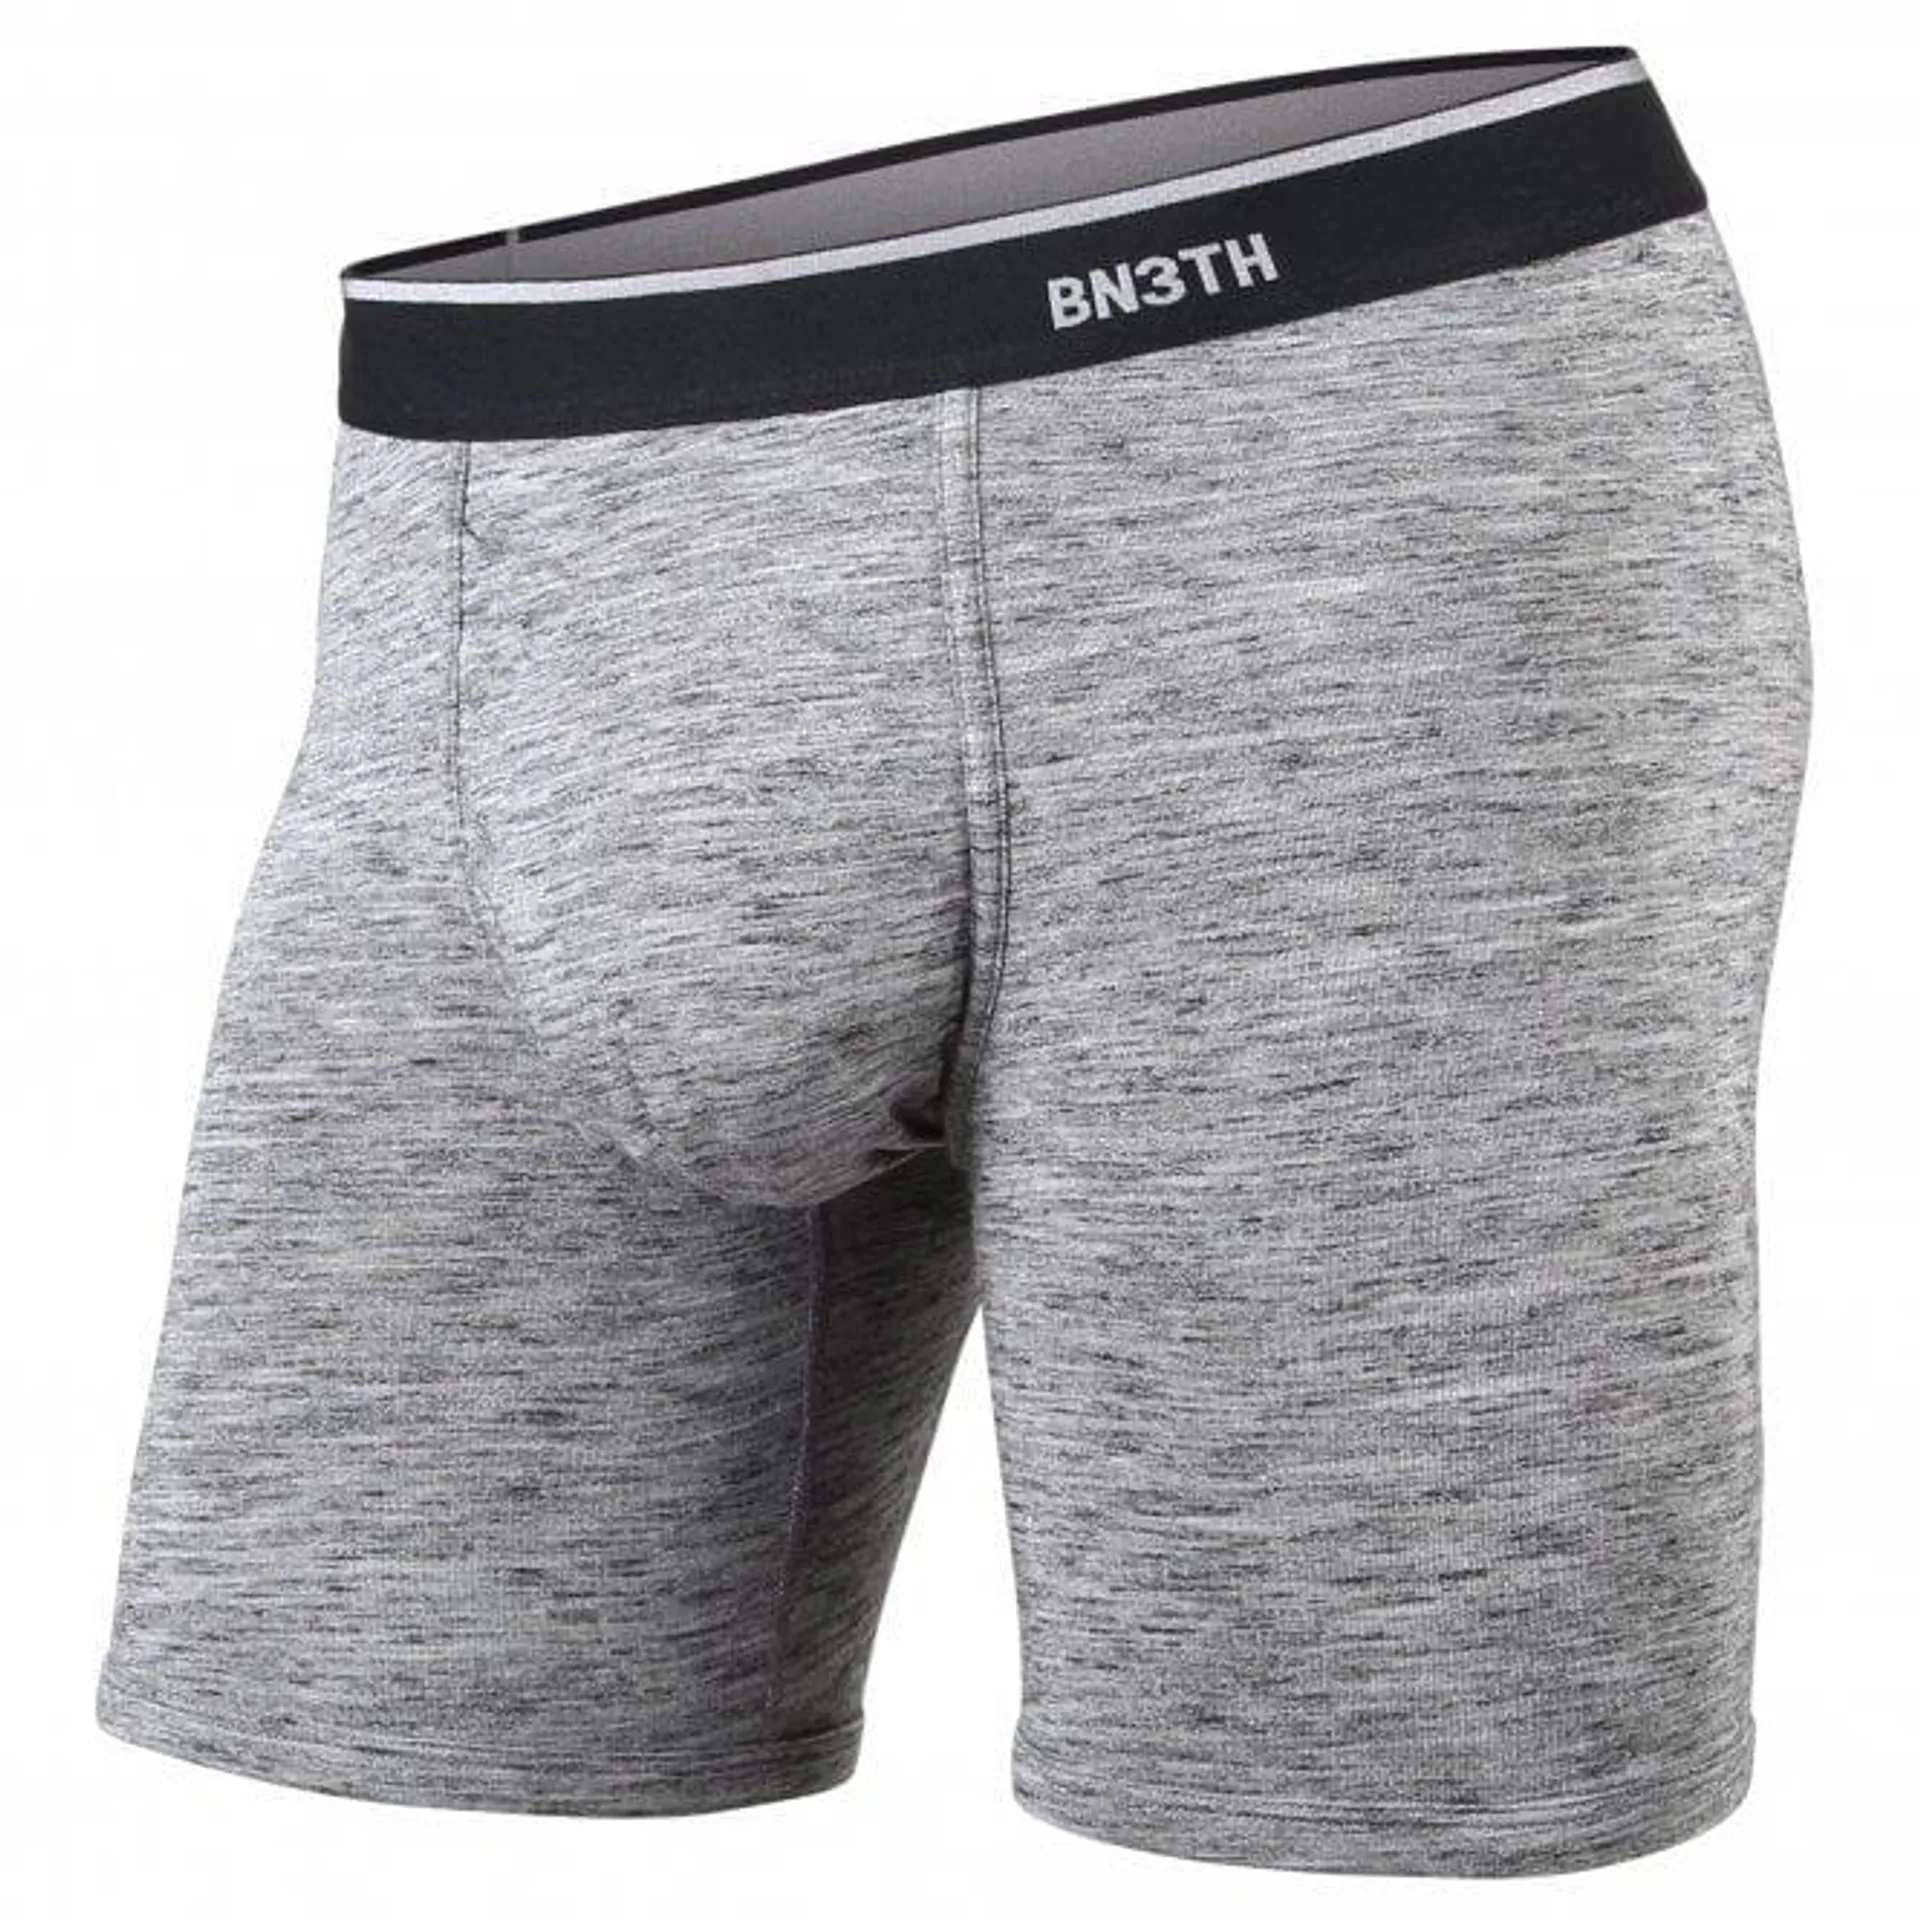 Modal Classic Boxer Brief, Charcoal Heather